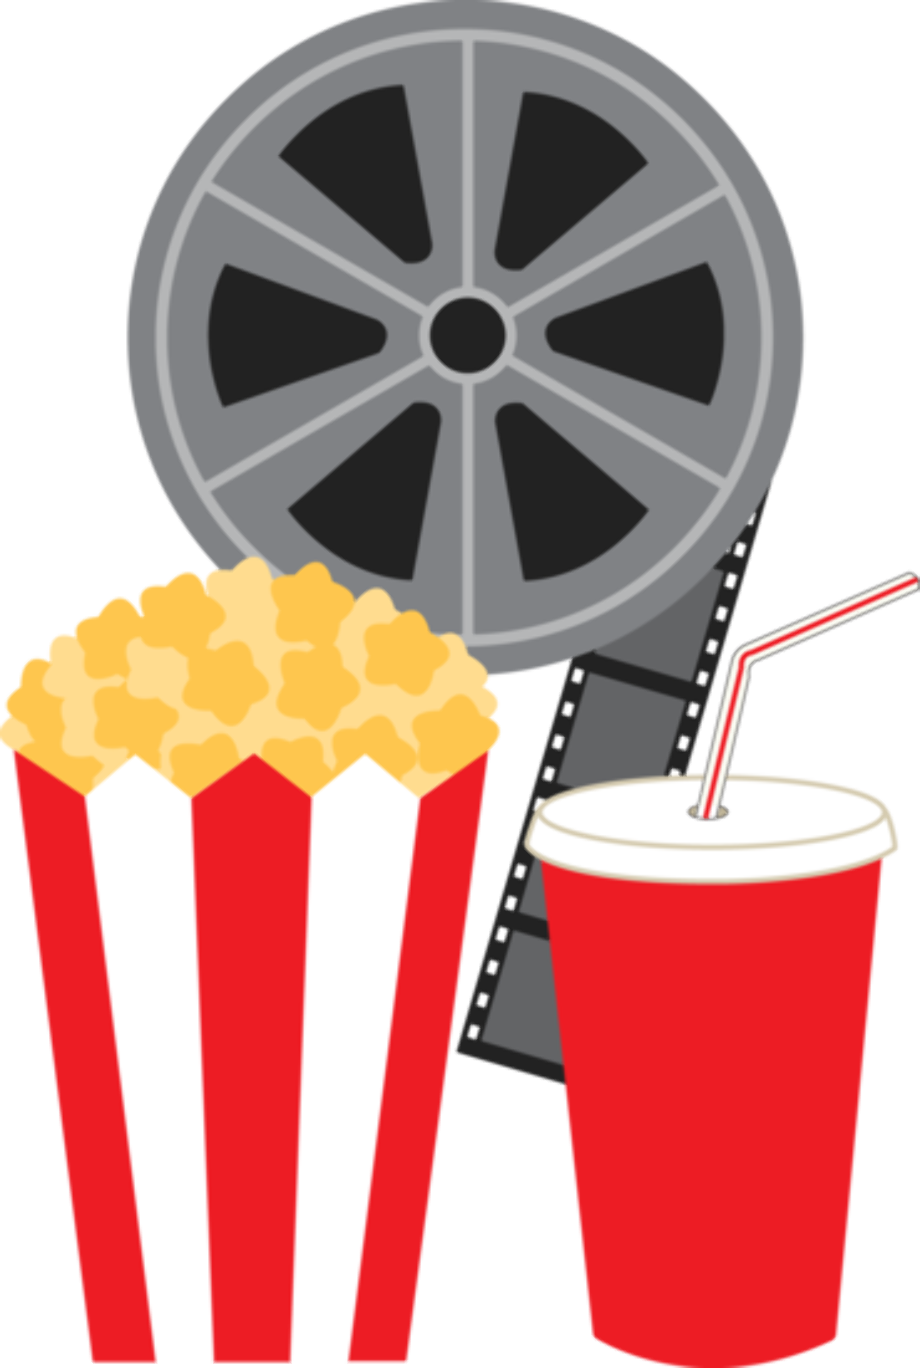 Download High Quality movie theater clipart transparent background